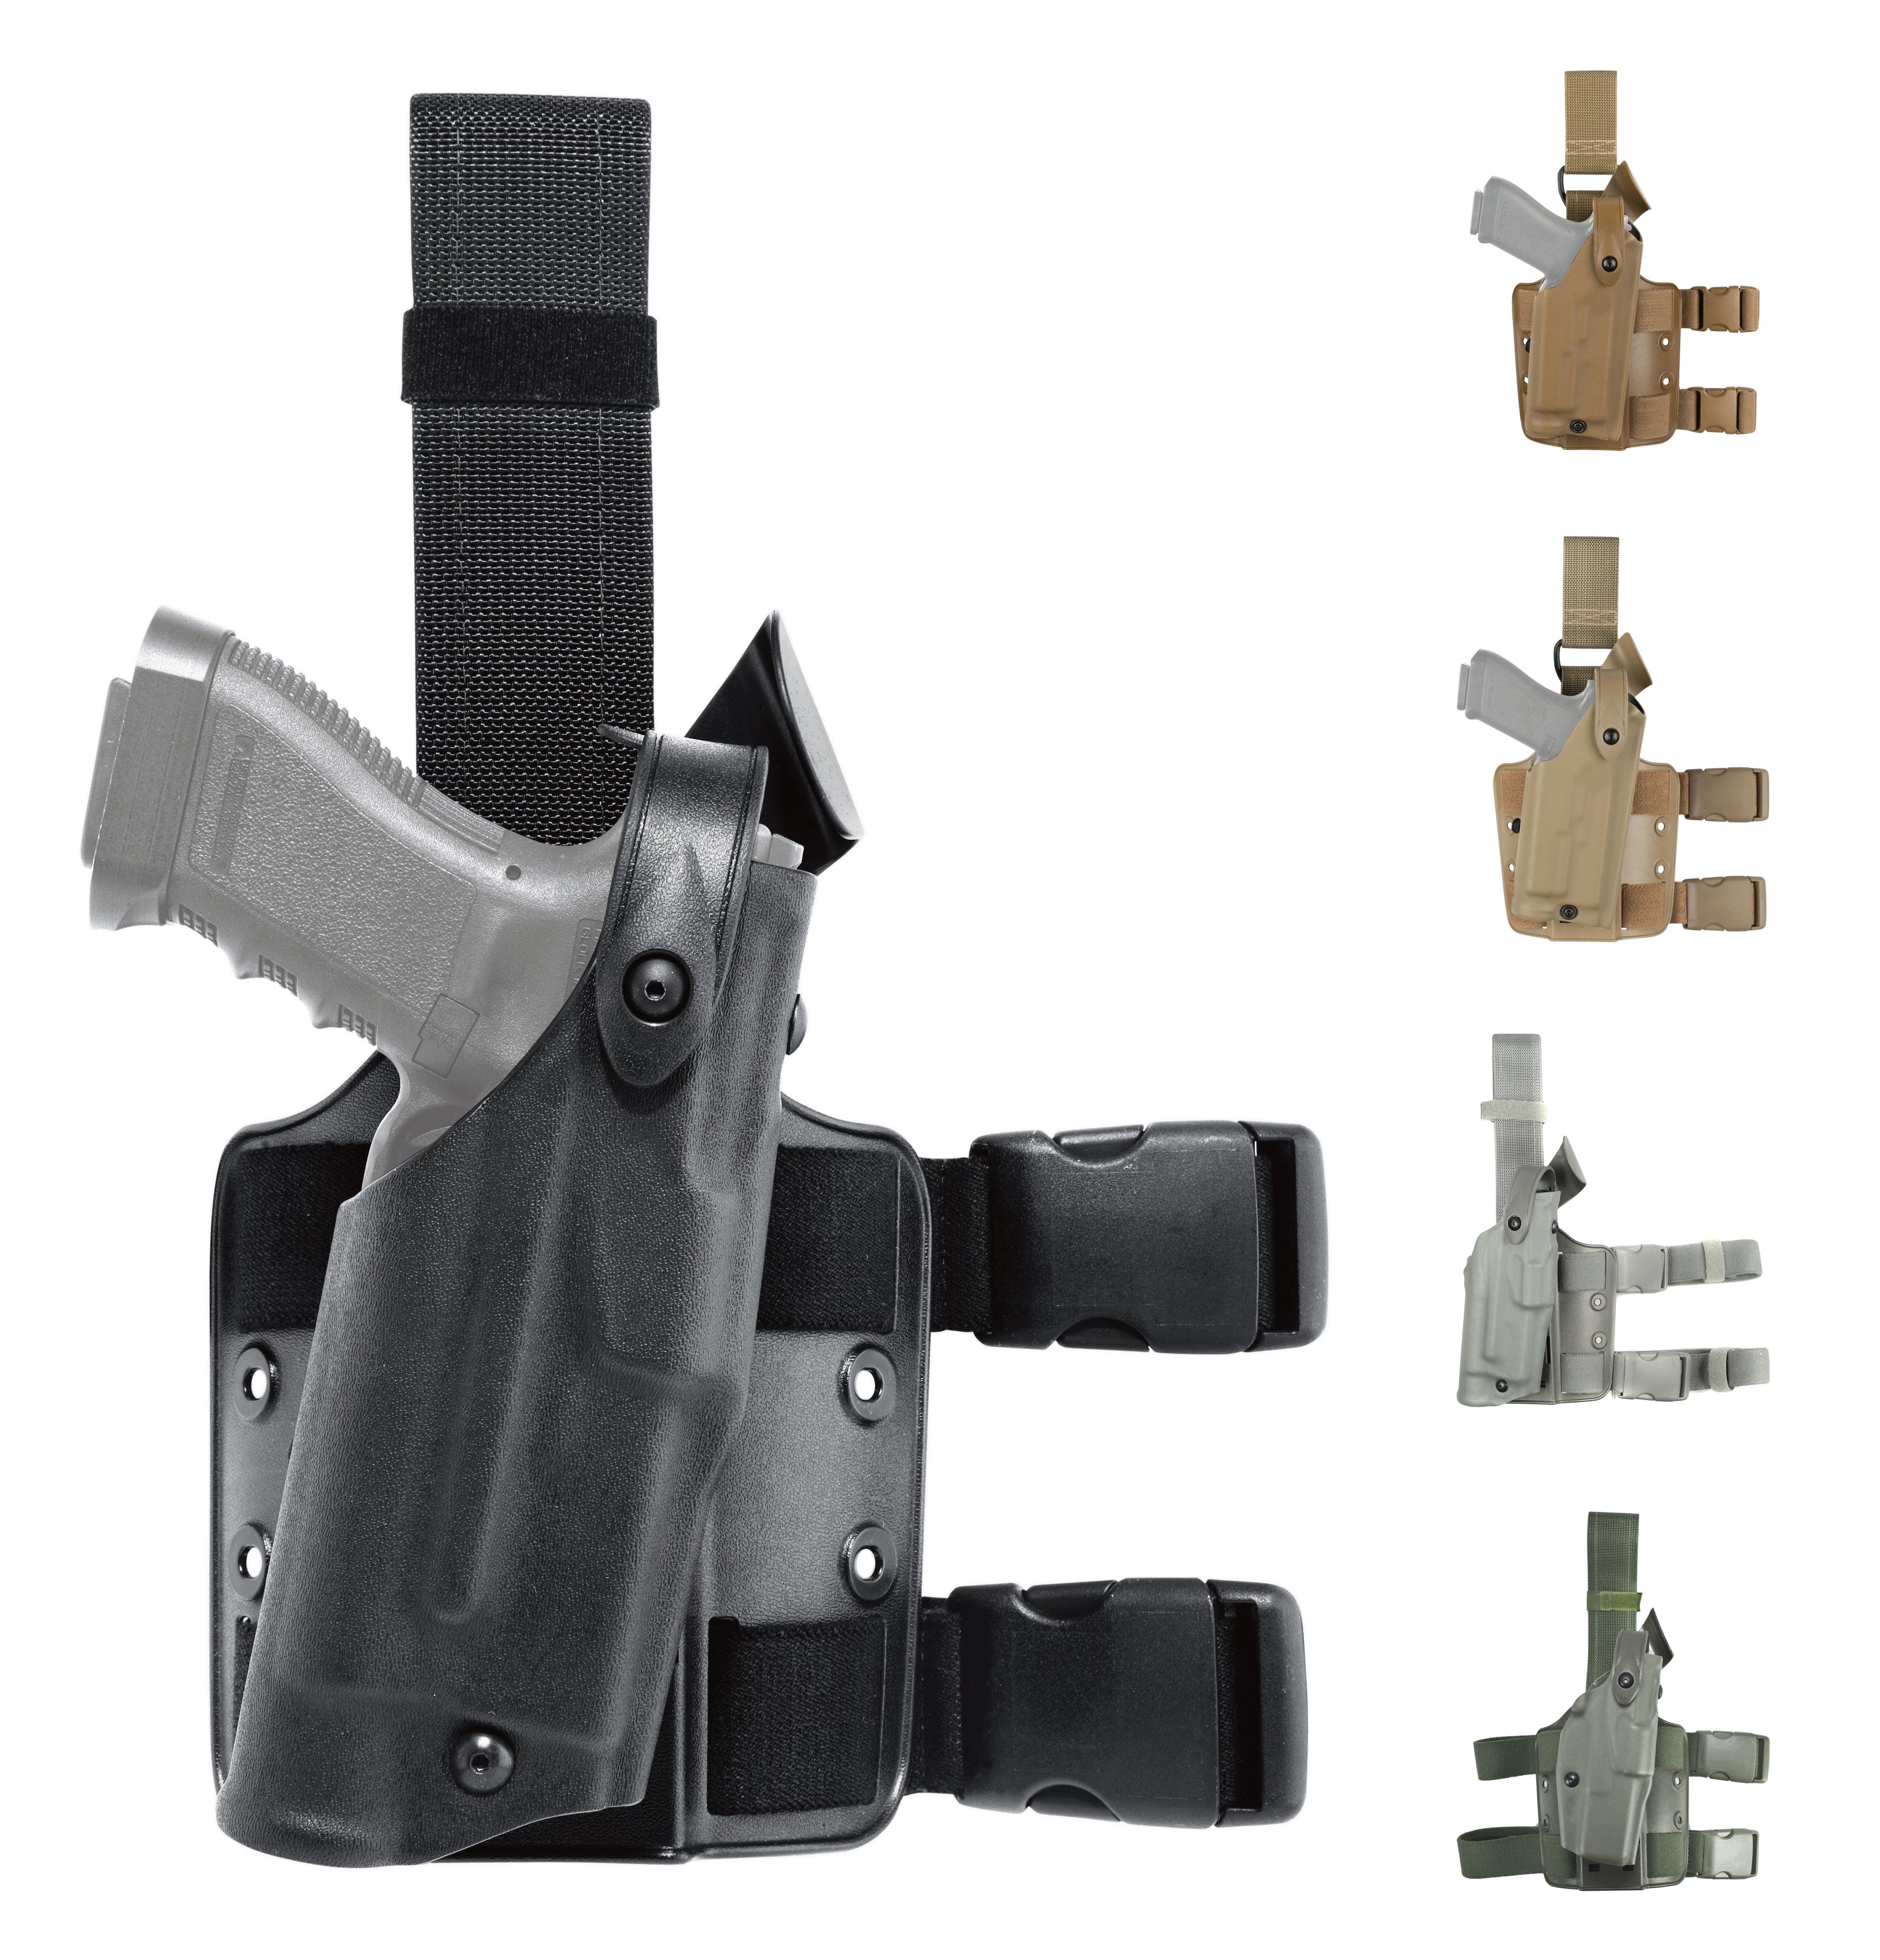 Safariland 6304 ALS/SLS Tactical Holster  Up to 20% Off w/ Free Shipping  and Handling